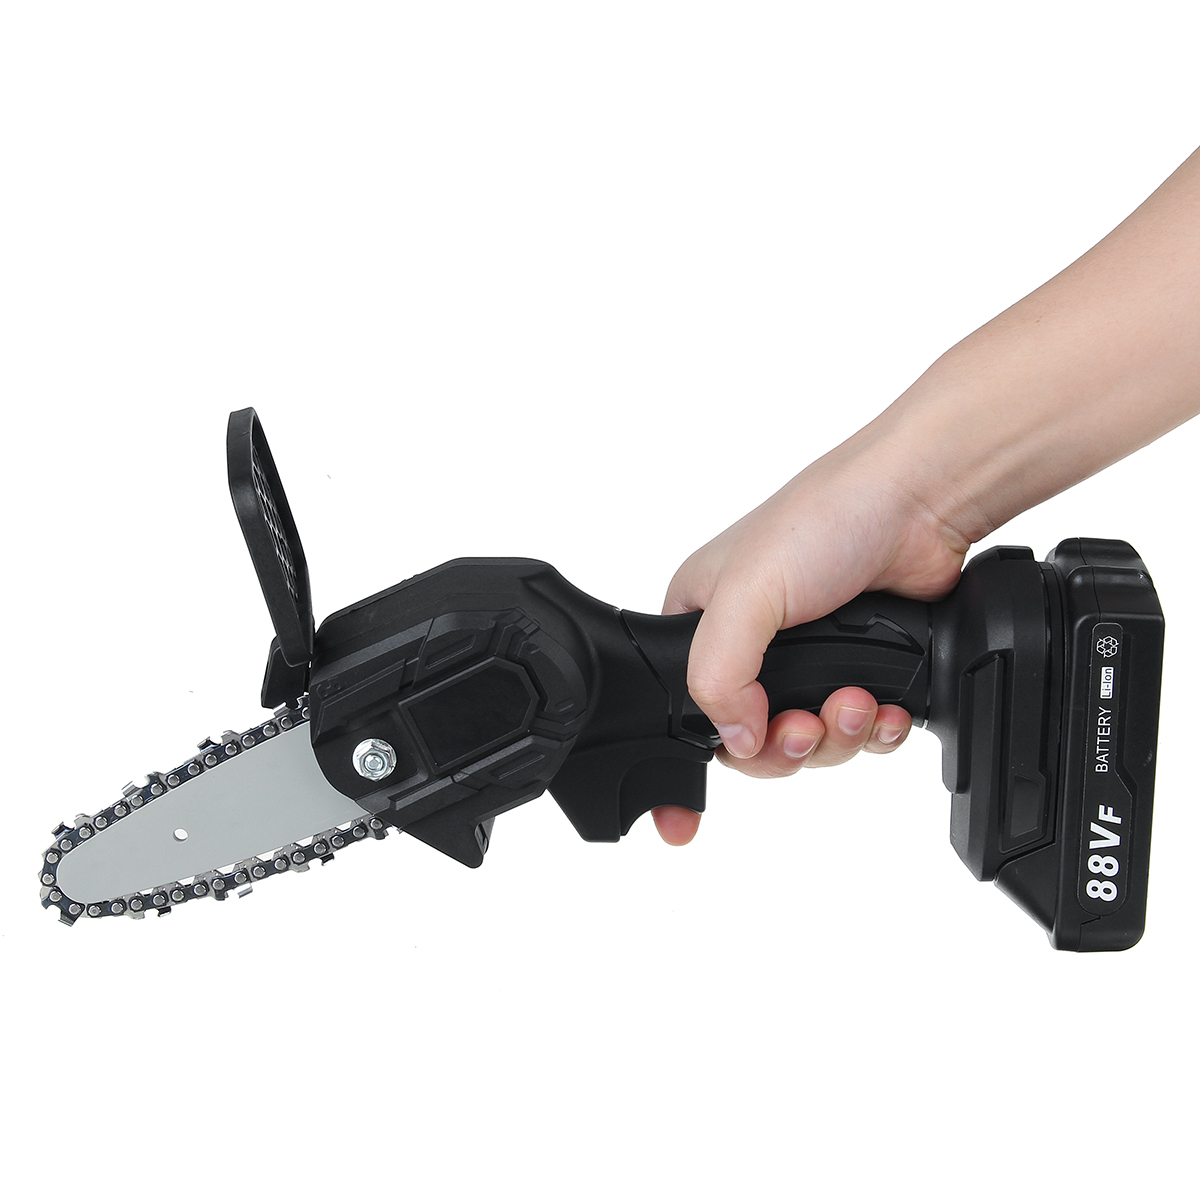 21V-Electric-Cordless-Chain-Saw-One-Hand-Saw-Woodworking-Tool-W-2pcs-Battery-1821600-7